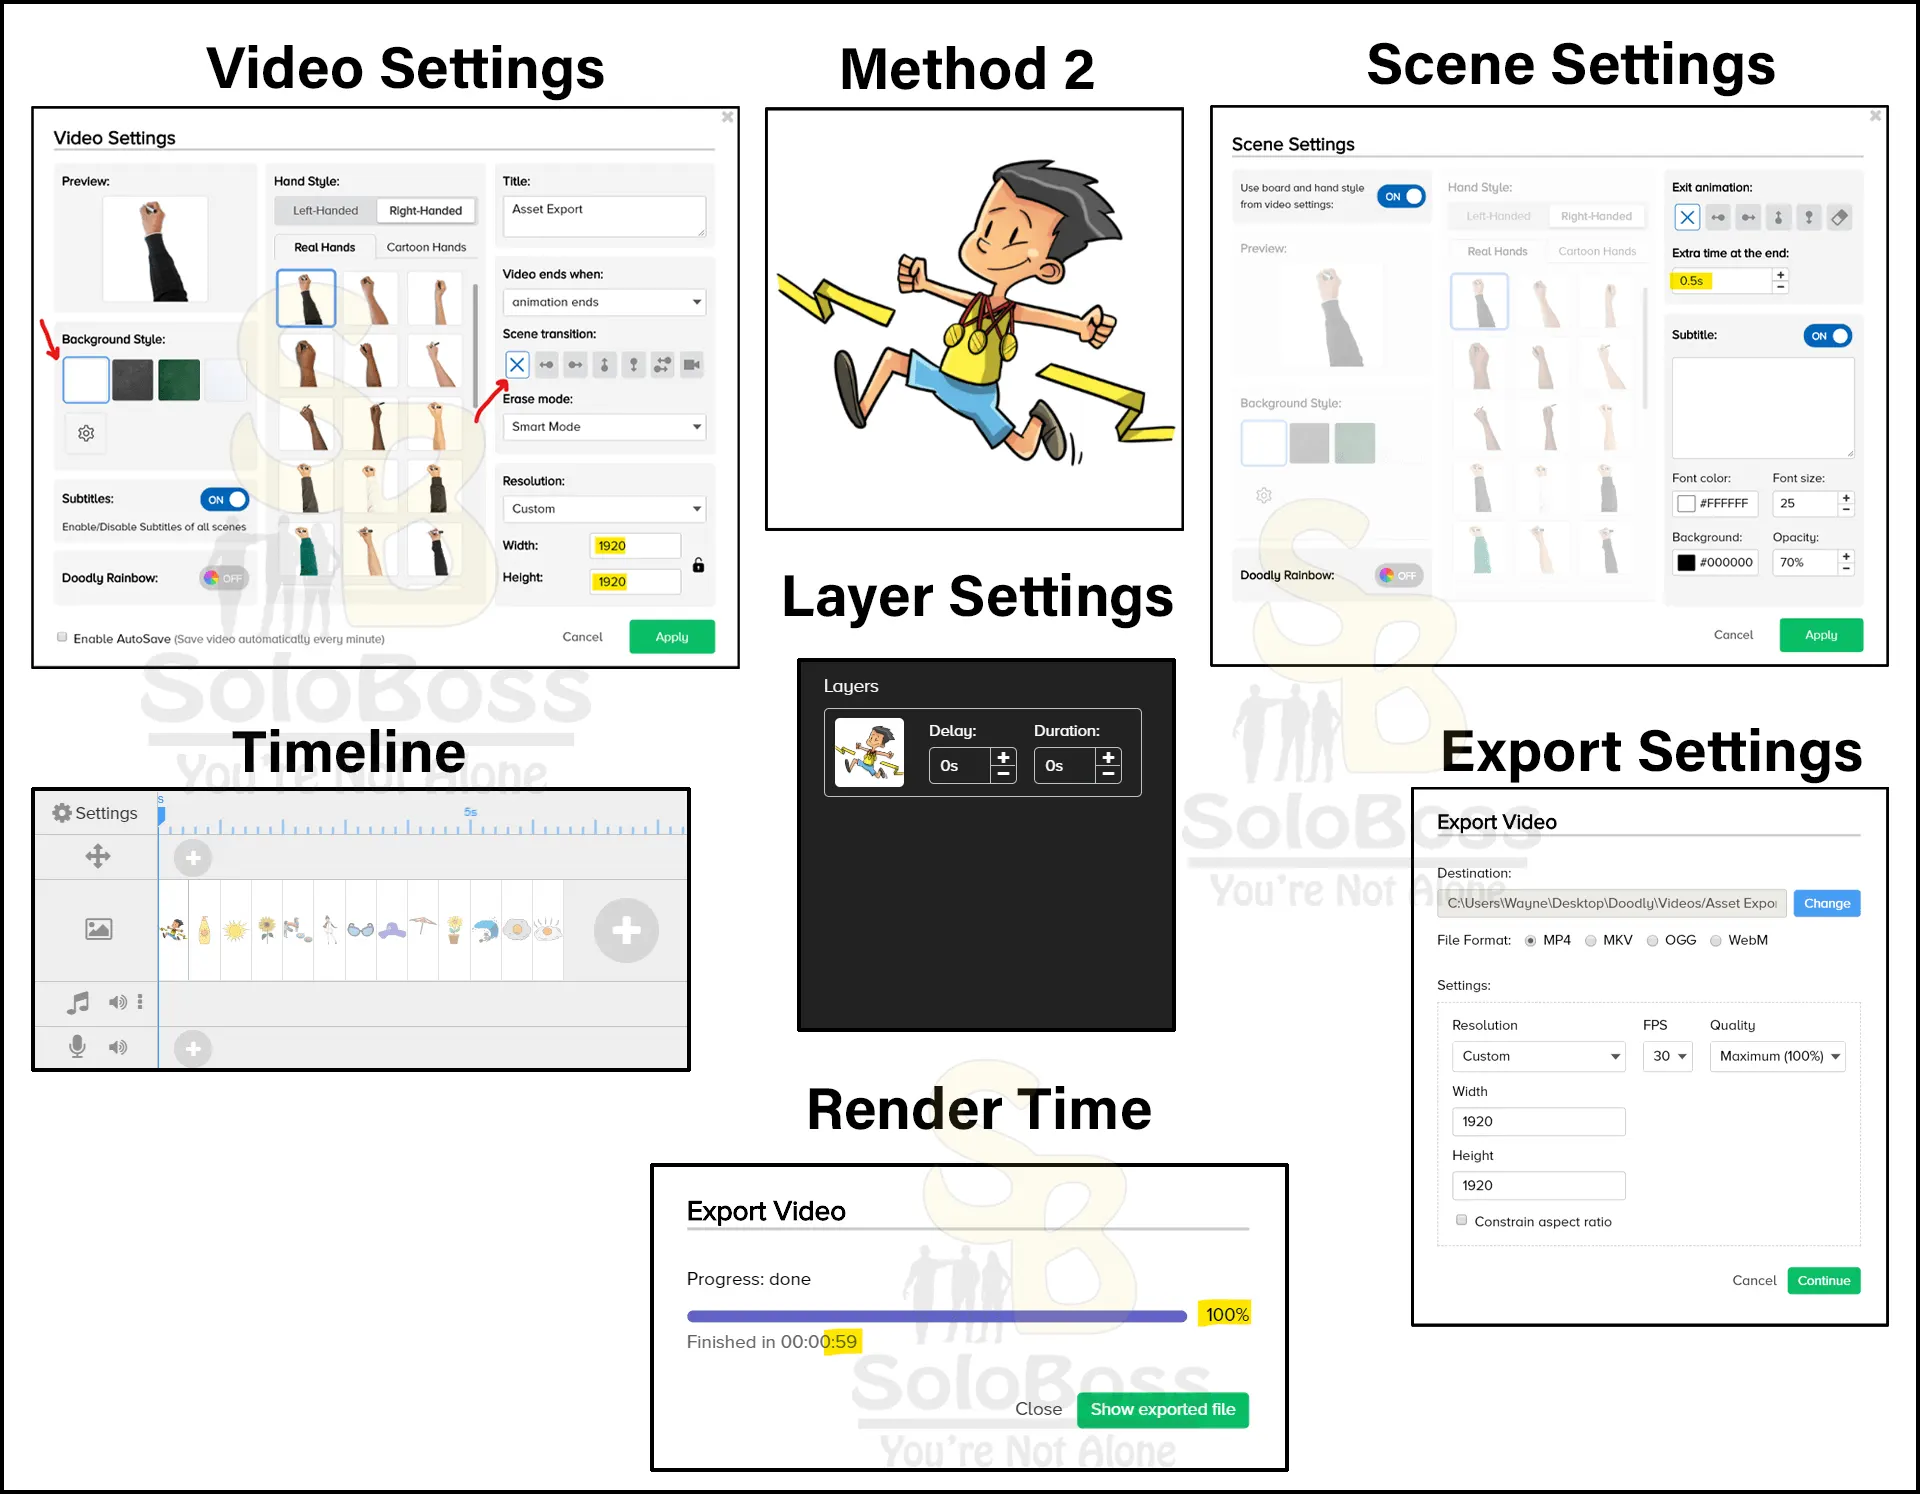 Displaying method two of have each asset in its own canvas and showing the settings to rapidly export Doodly assets out of Doodly.